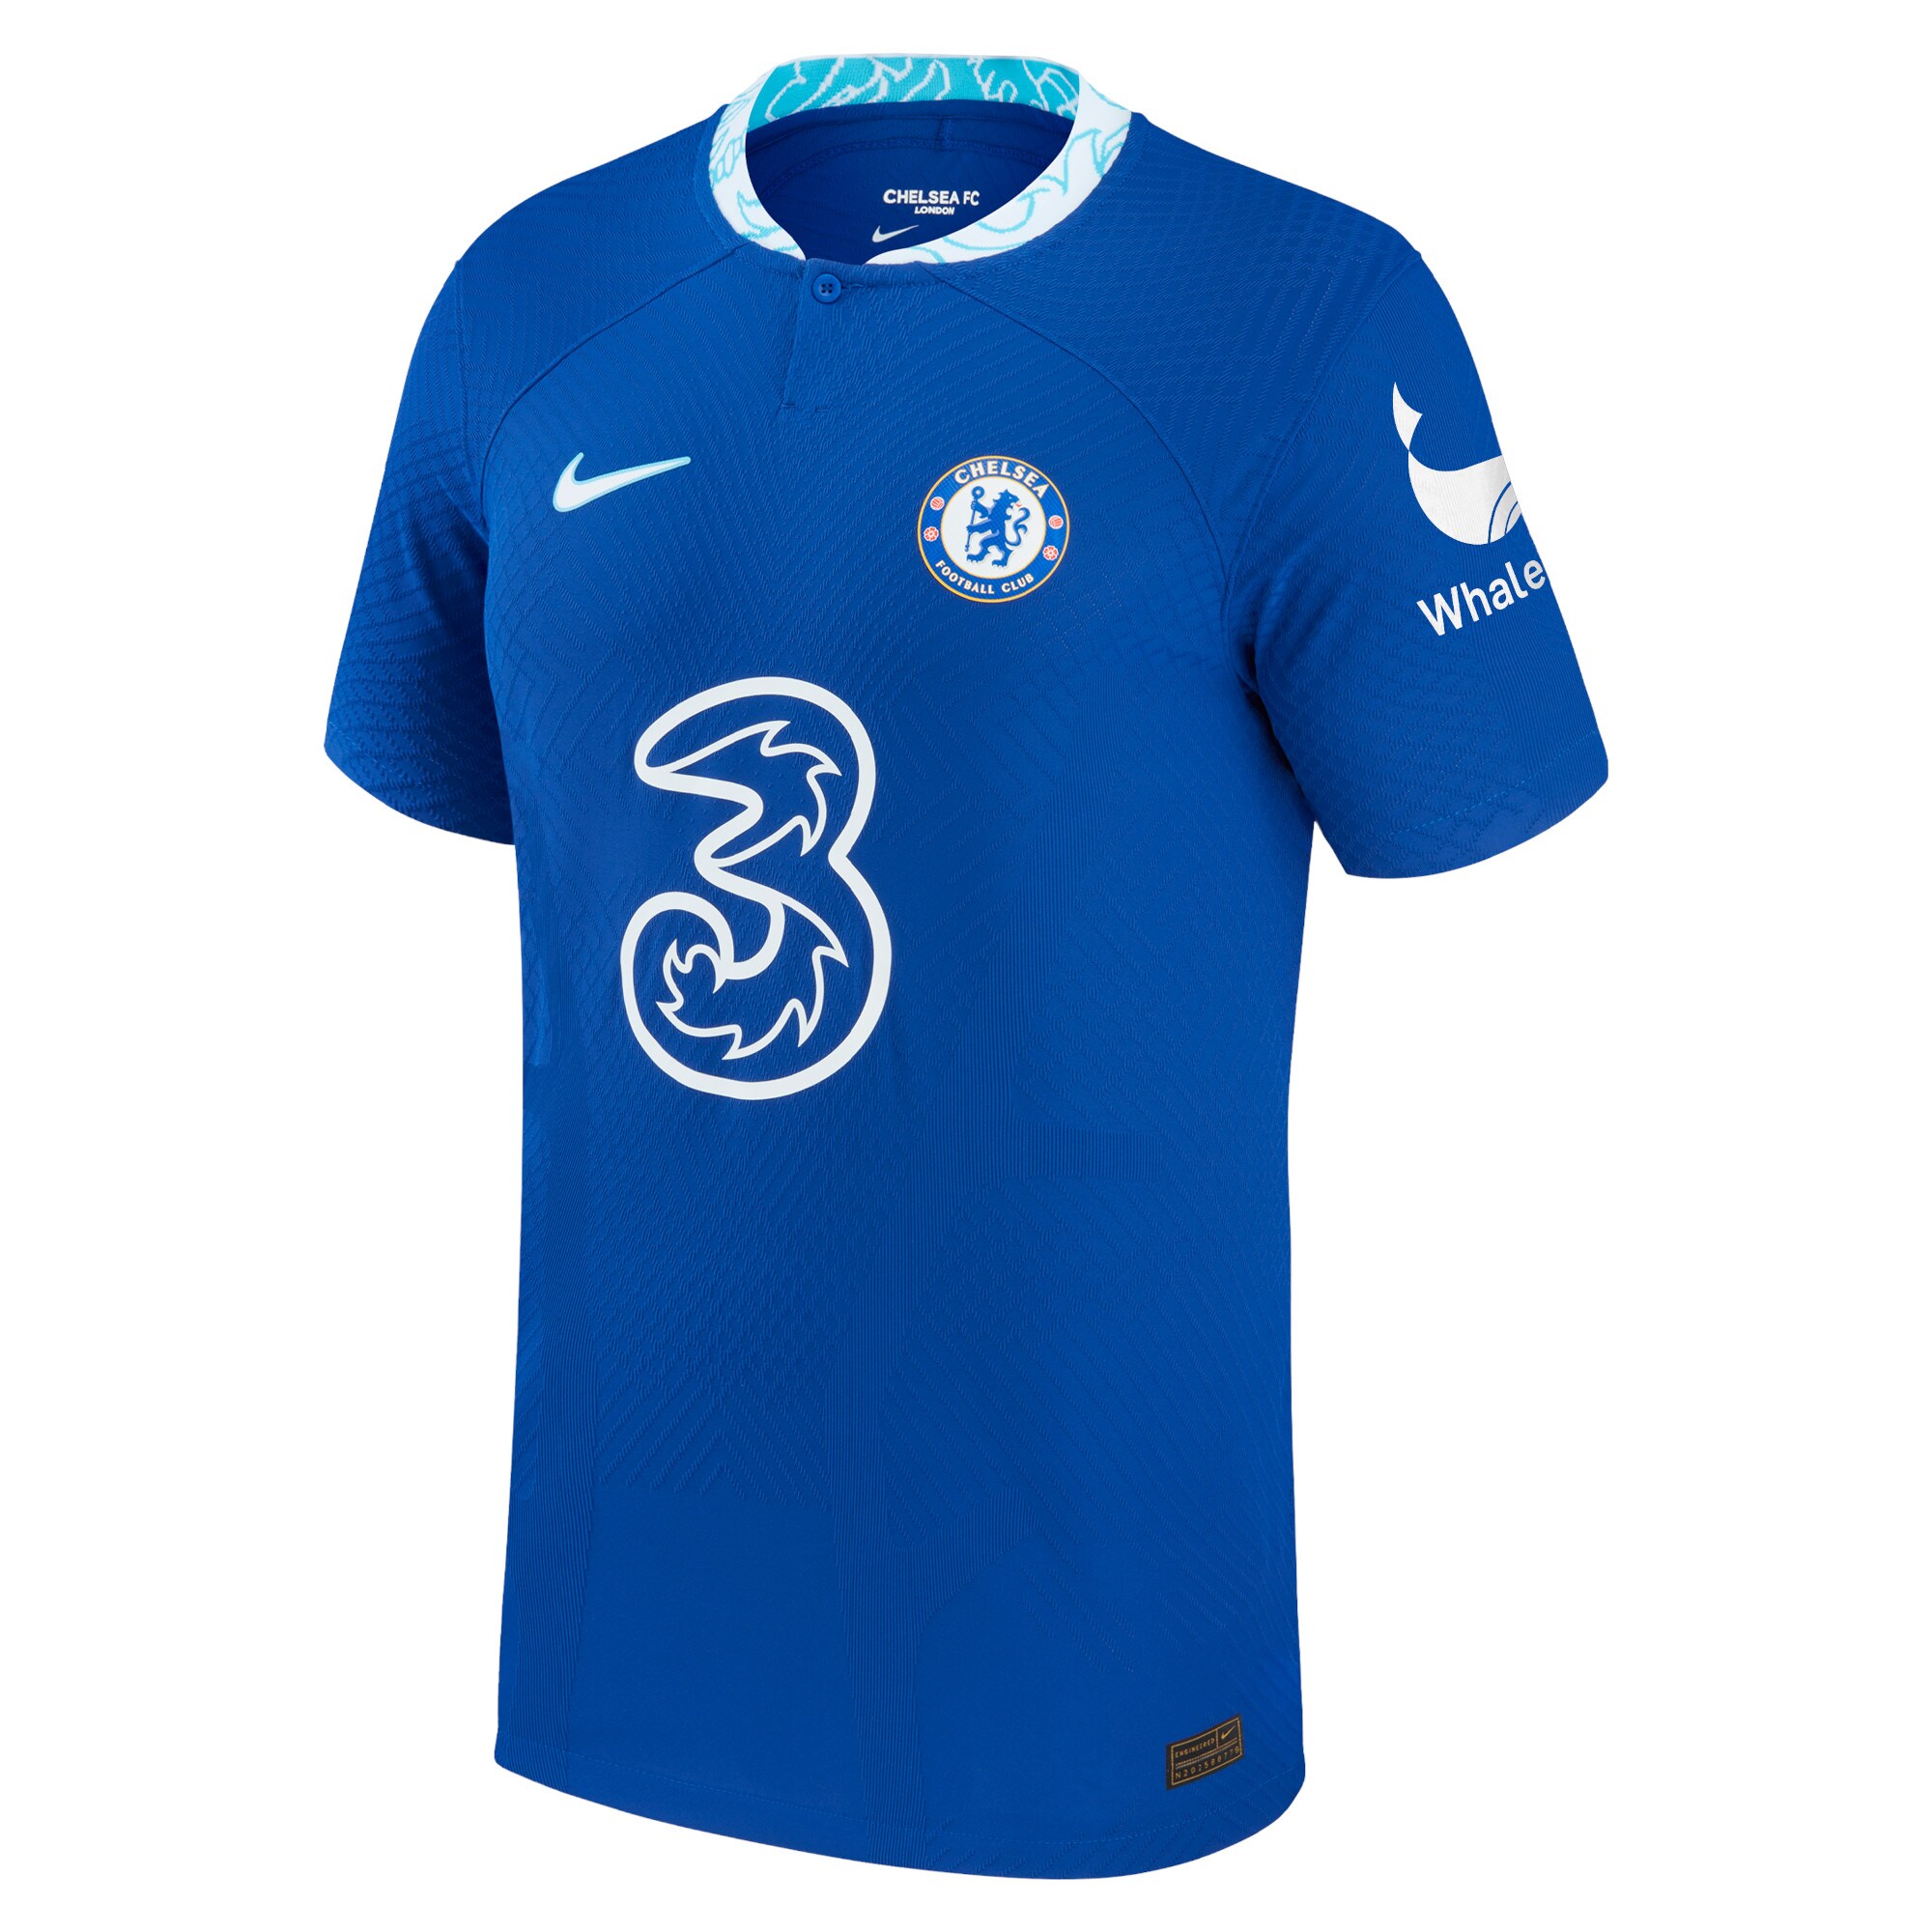 Chelsea Cup Home Vapor Match Shirt 2022-23 with Madueke 31 printing